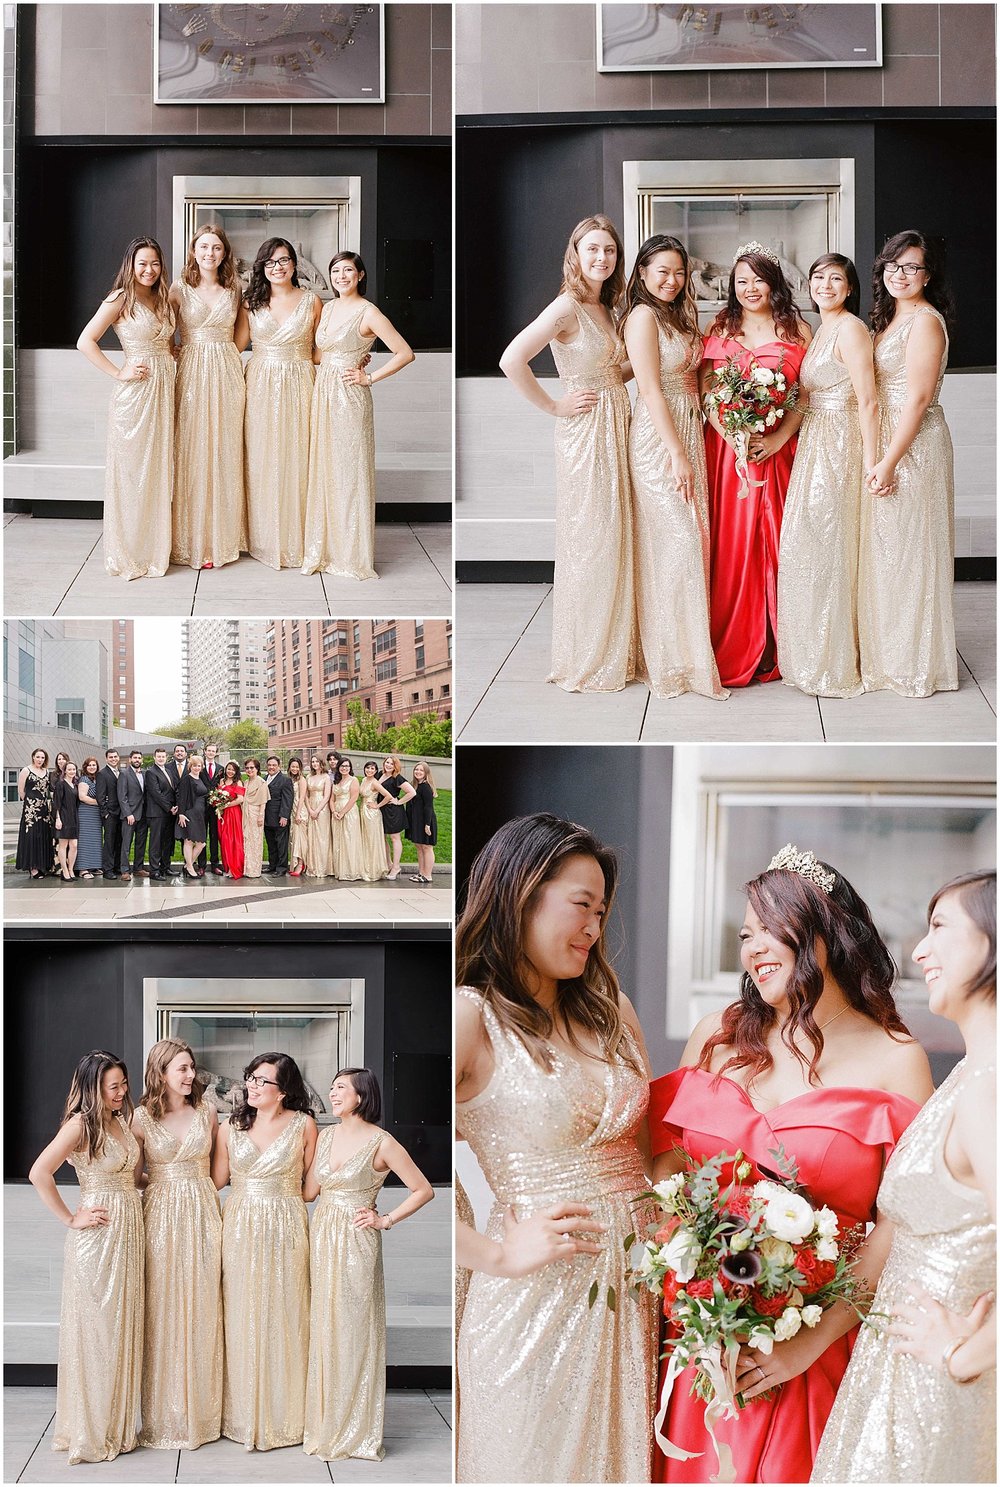 bridal party photos at an intimate wedding in hoboken new jersey at the W Hotel